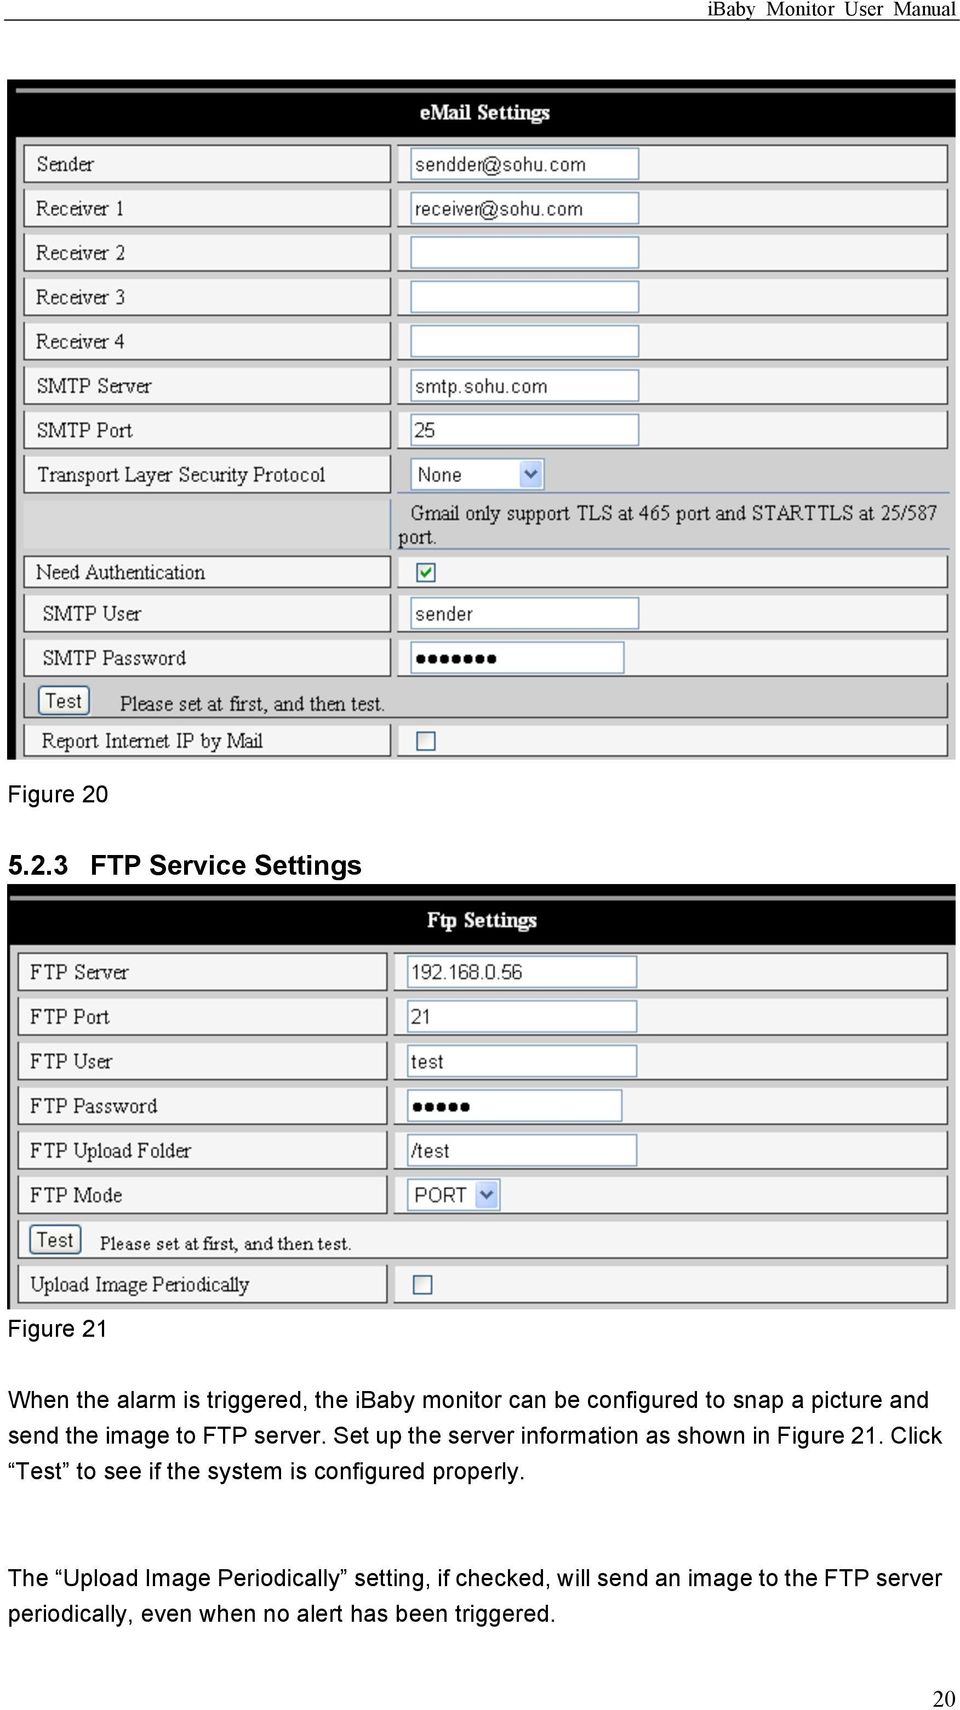 to snap a picture and send the image to FTP server. Set up the server information as shown in Figure 21.